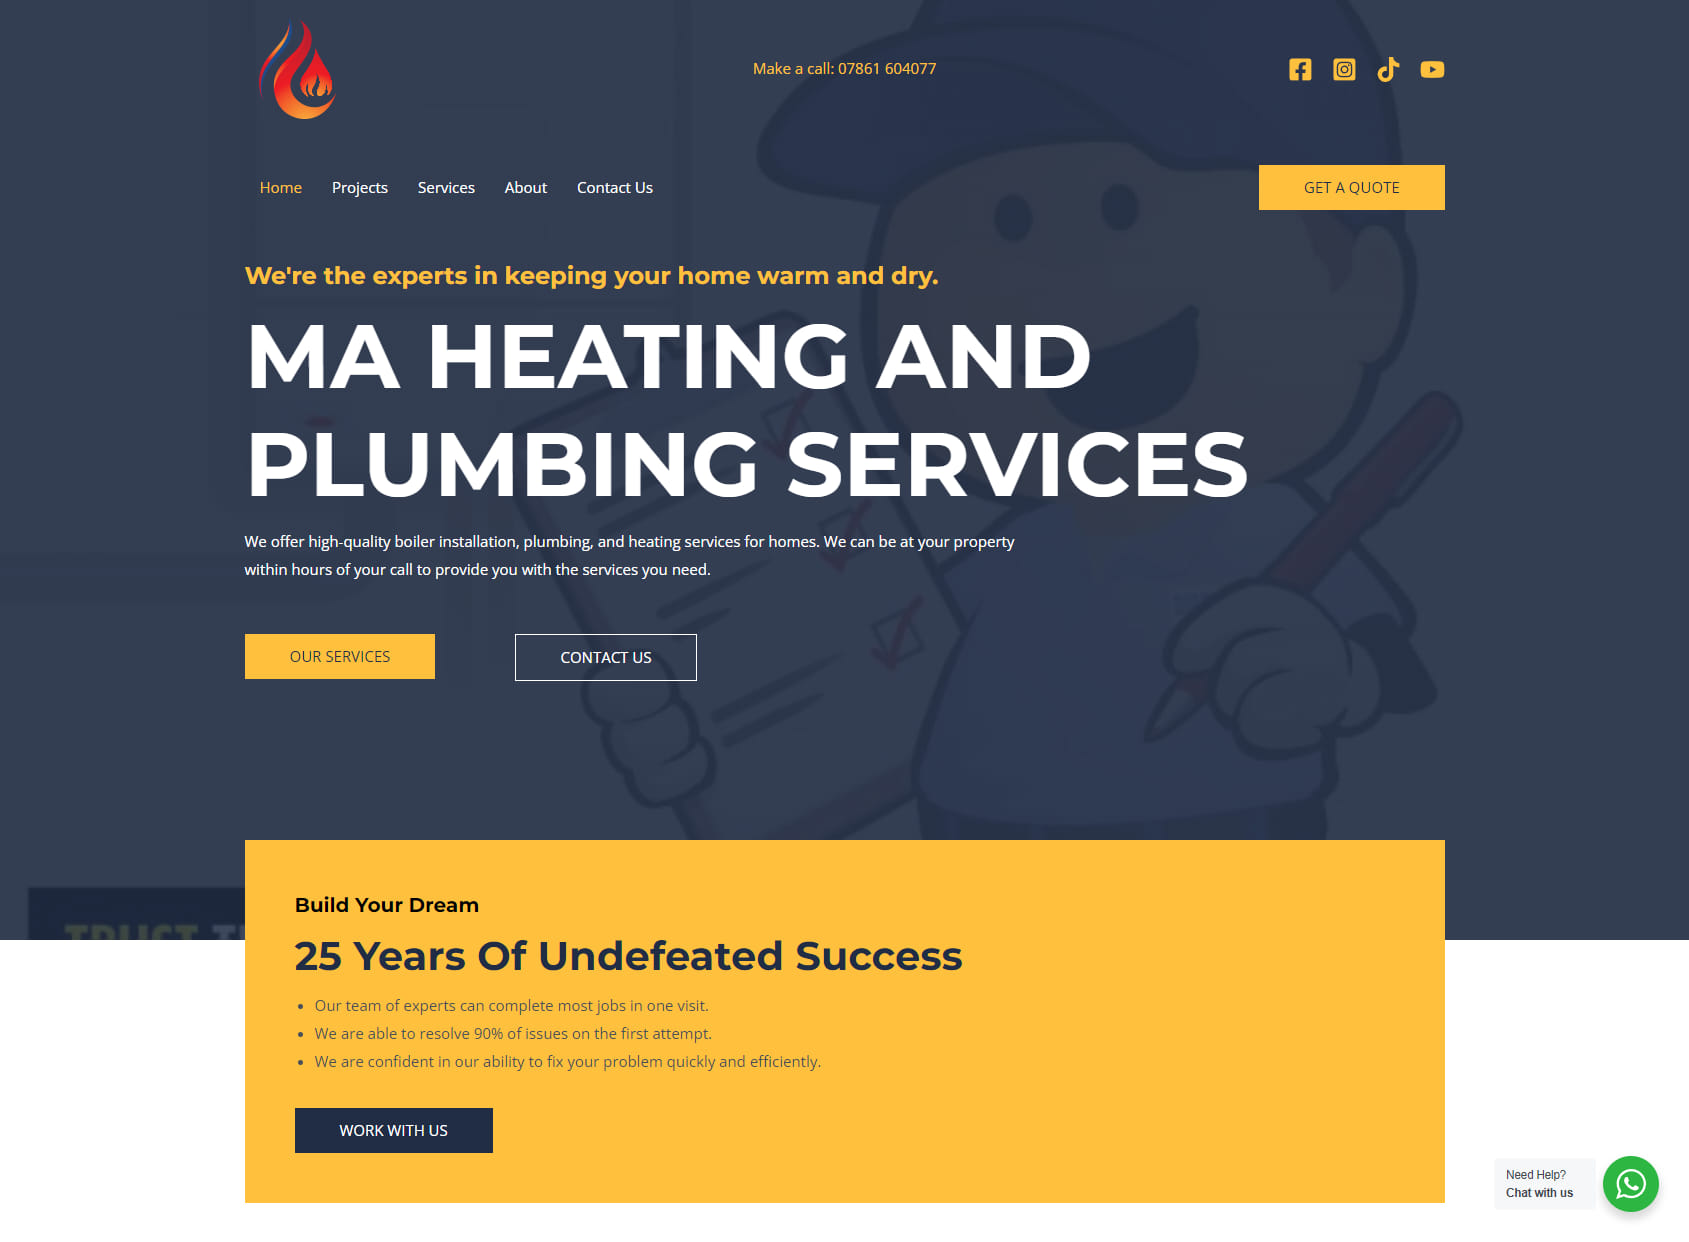 MA Heating and Plumbing Services ltd